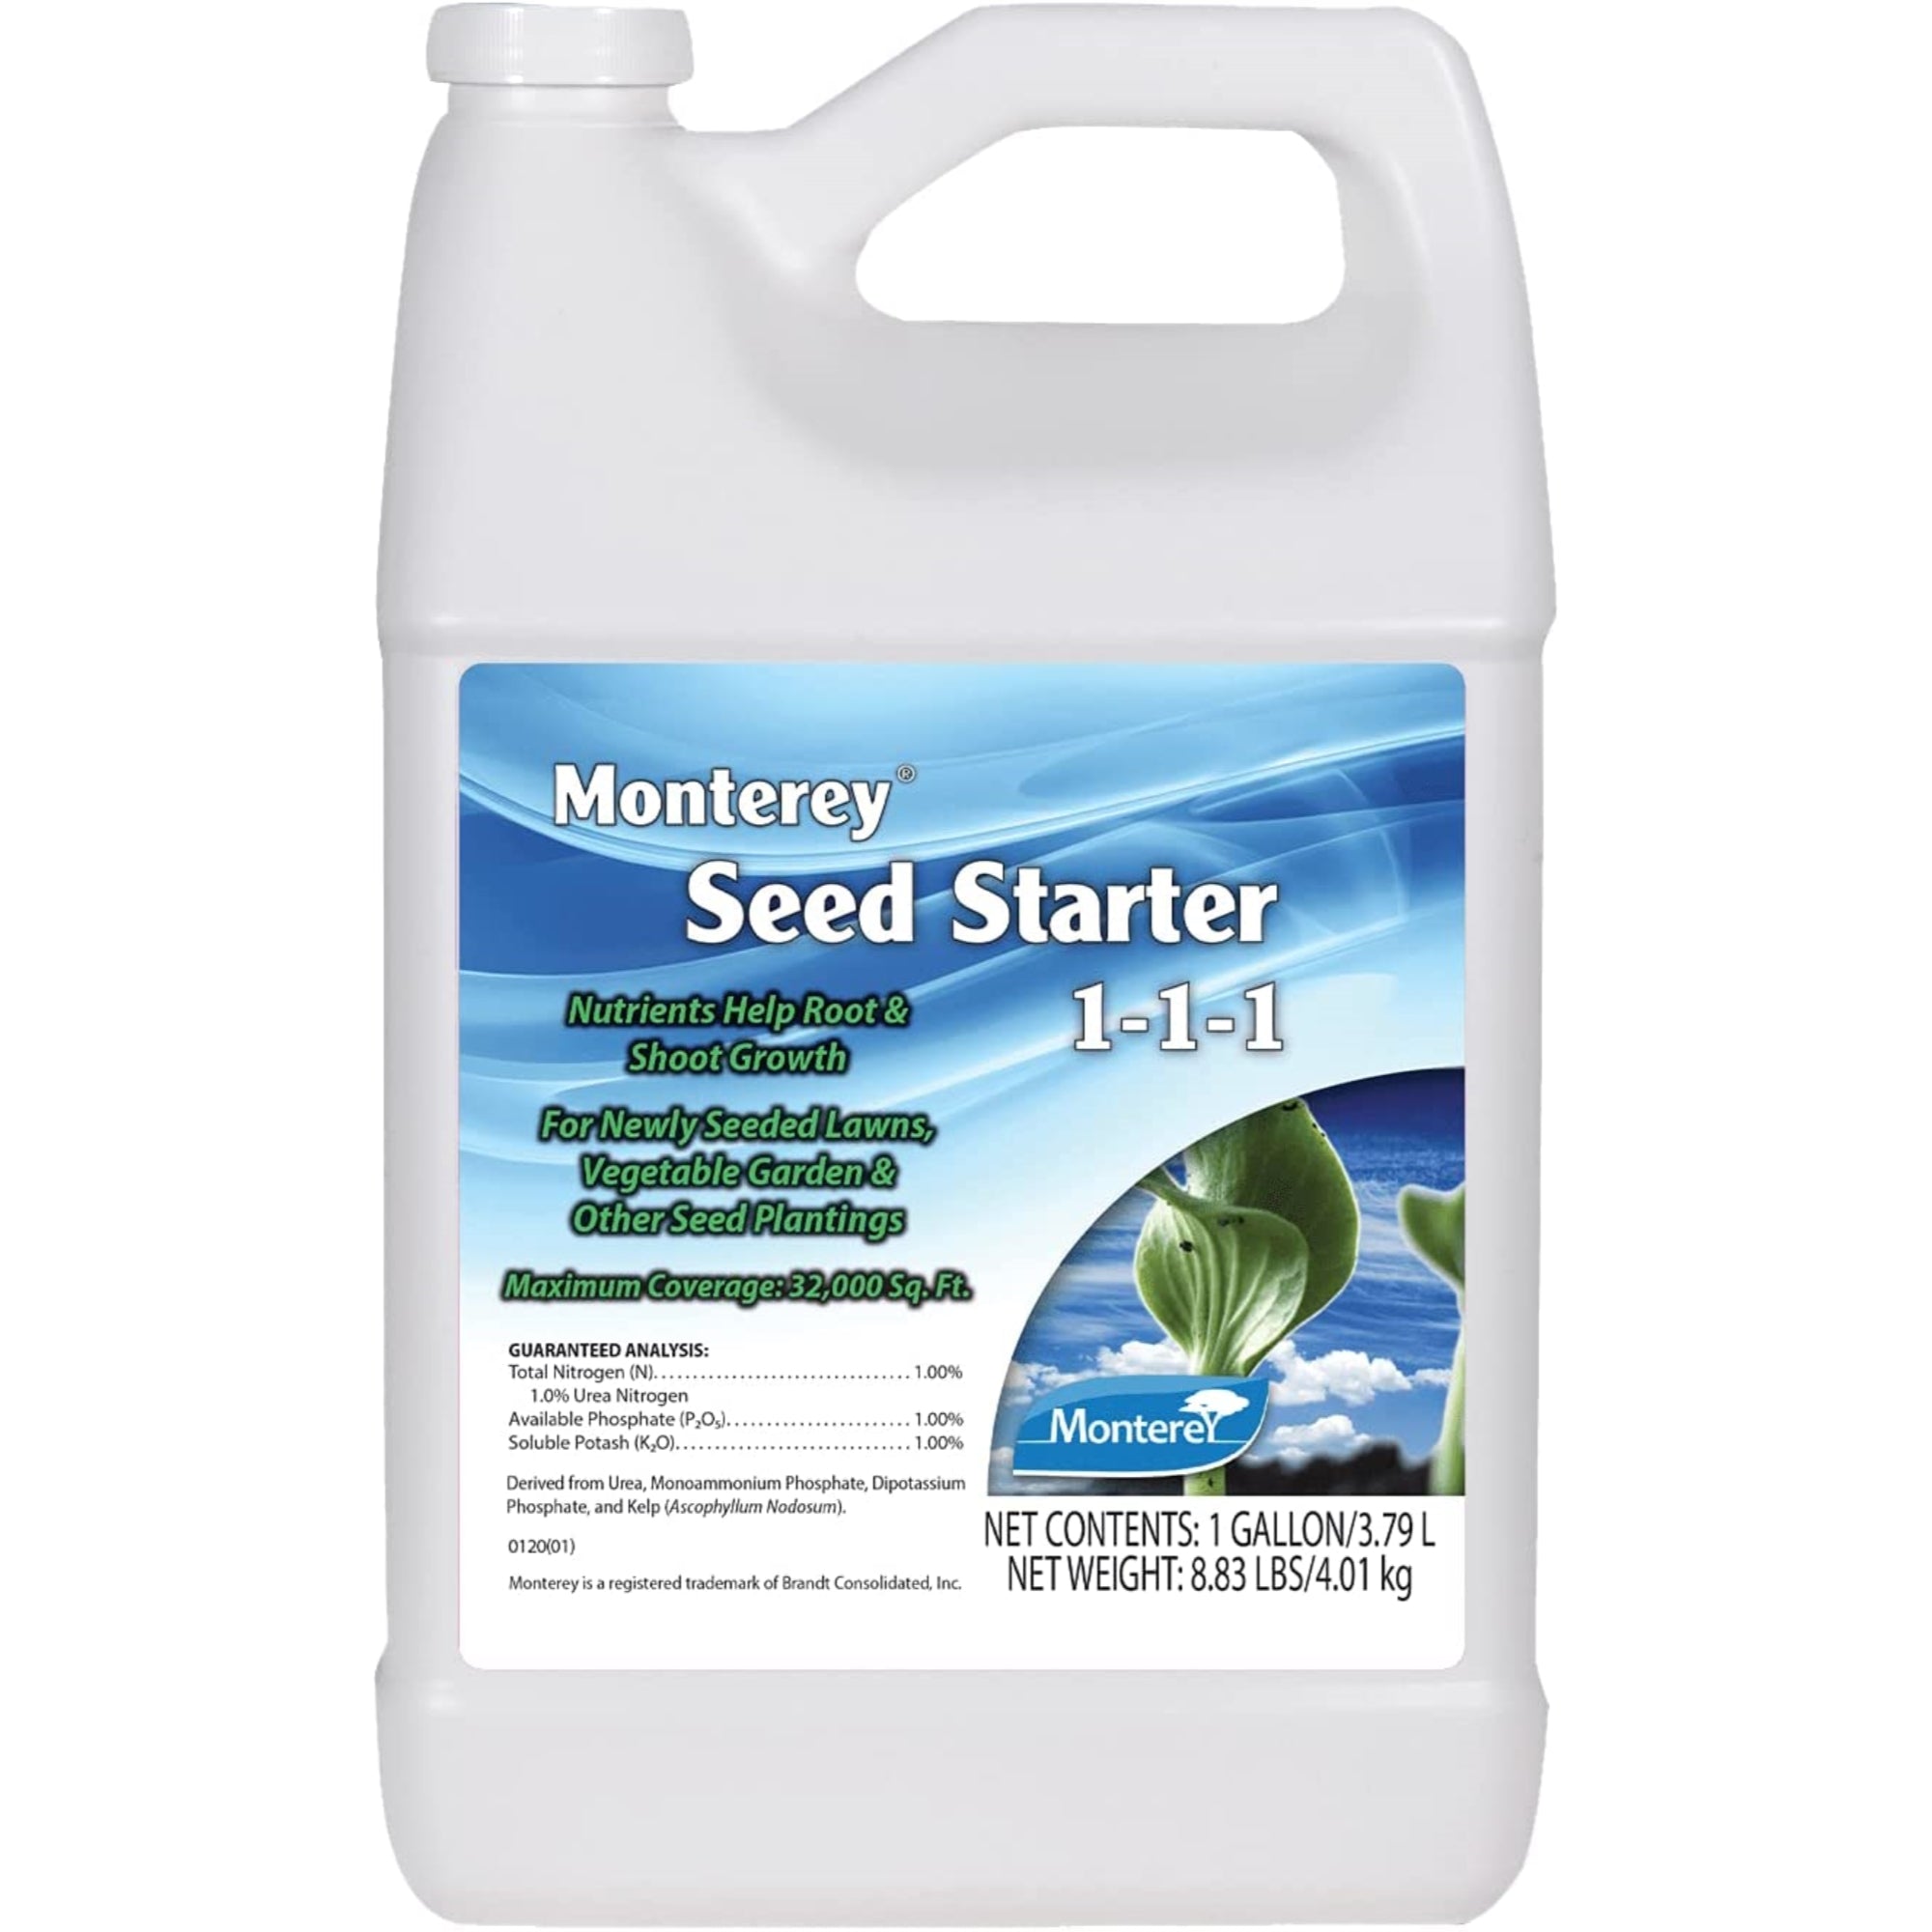 Monterey Concentrated Seed Starter Nutrient Fertilizer 1-1-1, 1 Gallon